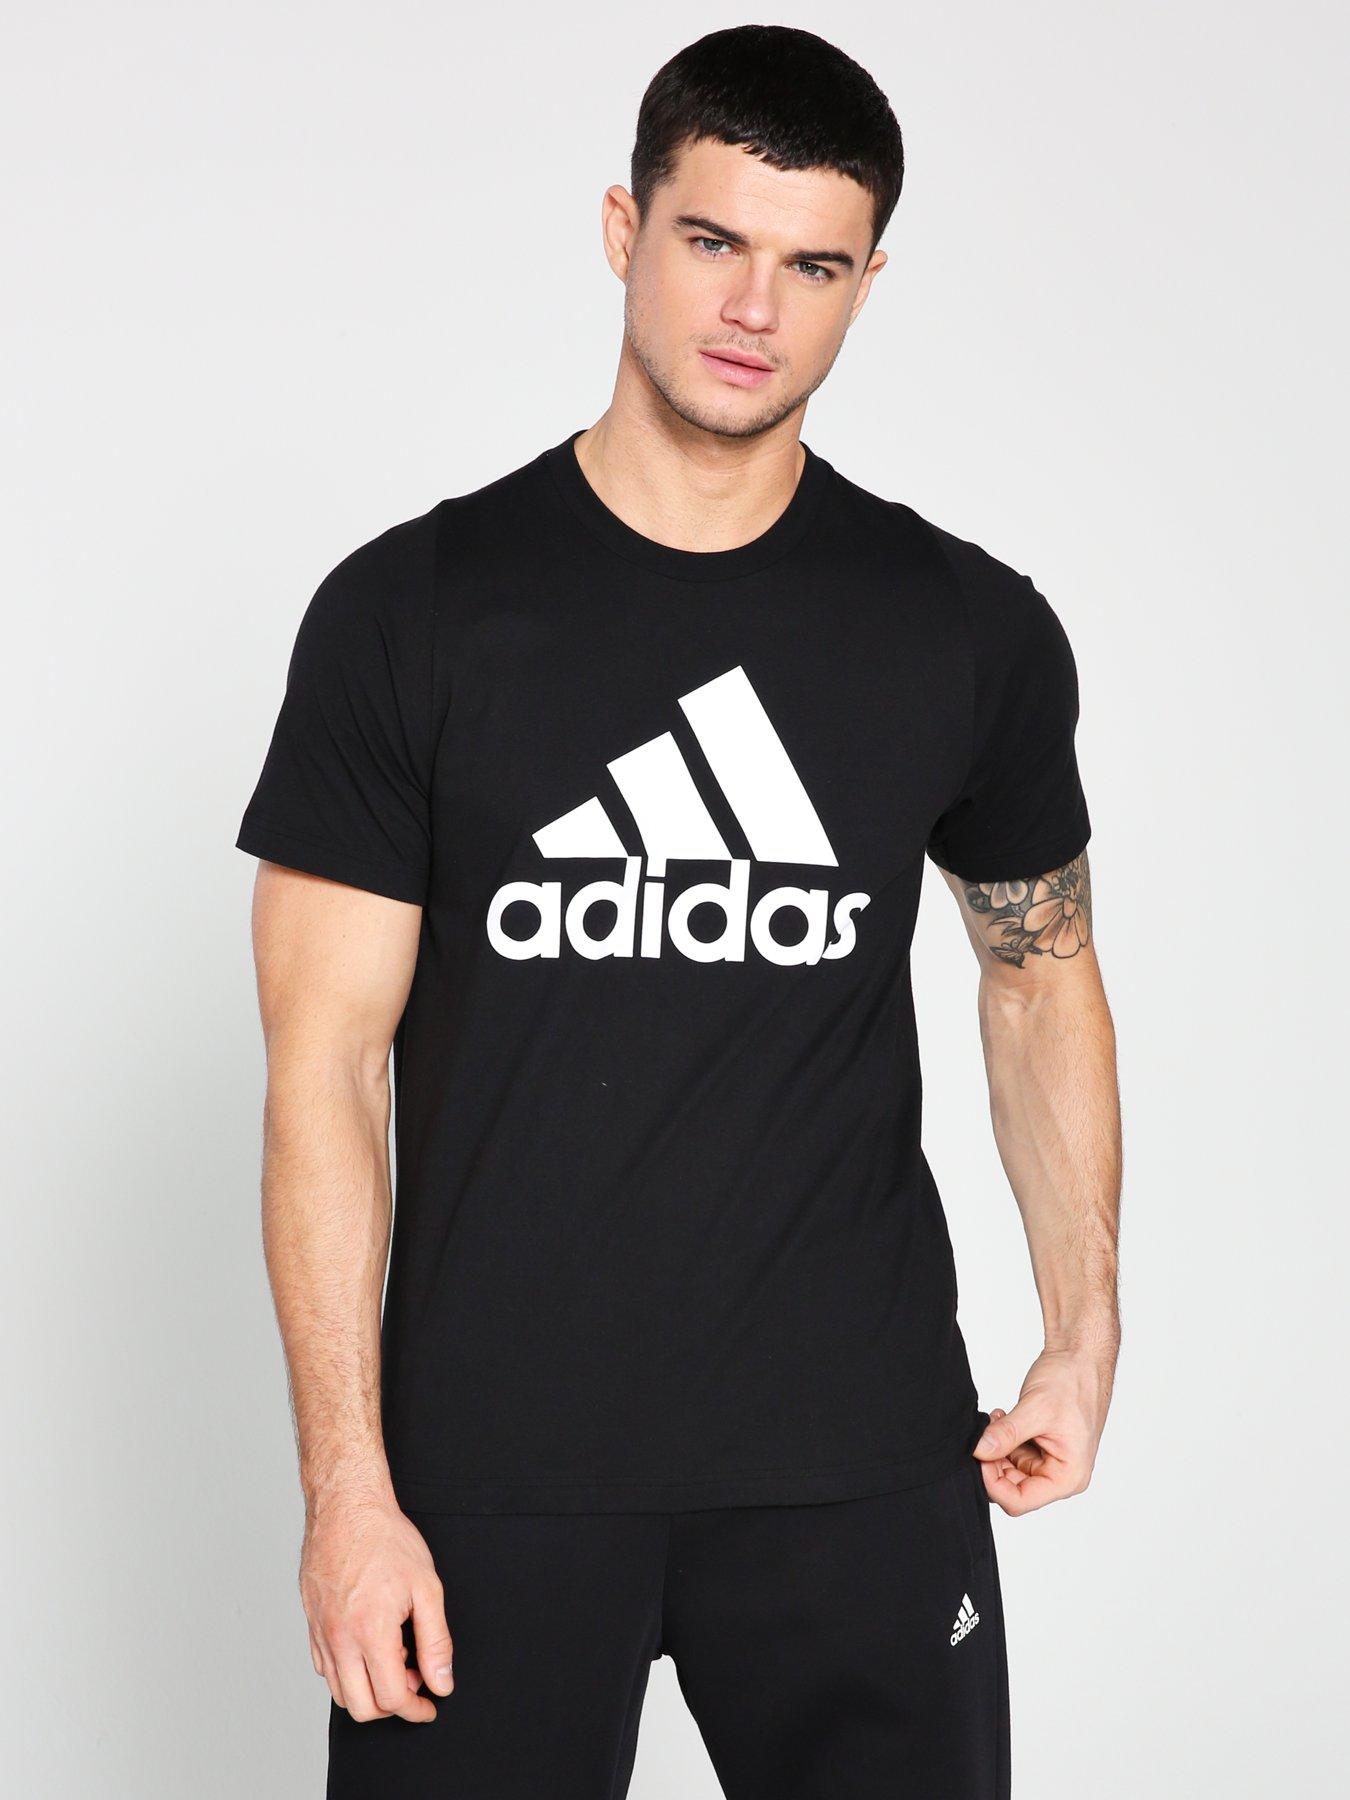 adidas 3xl t shirts Online Shopping for 